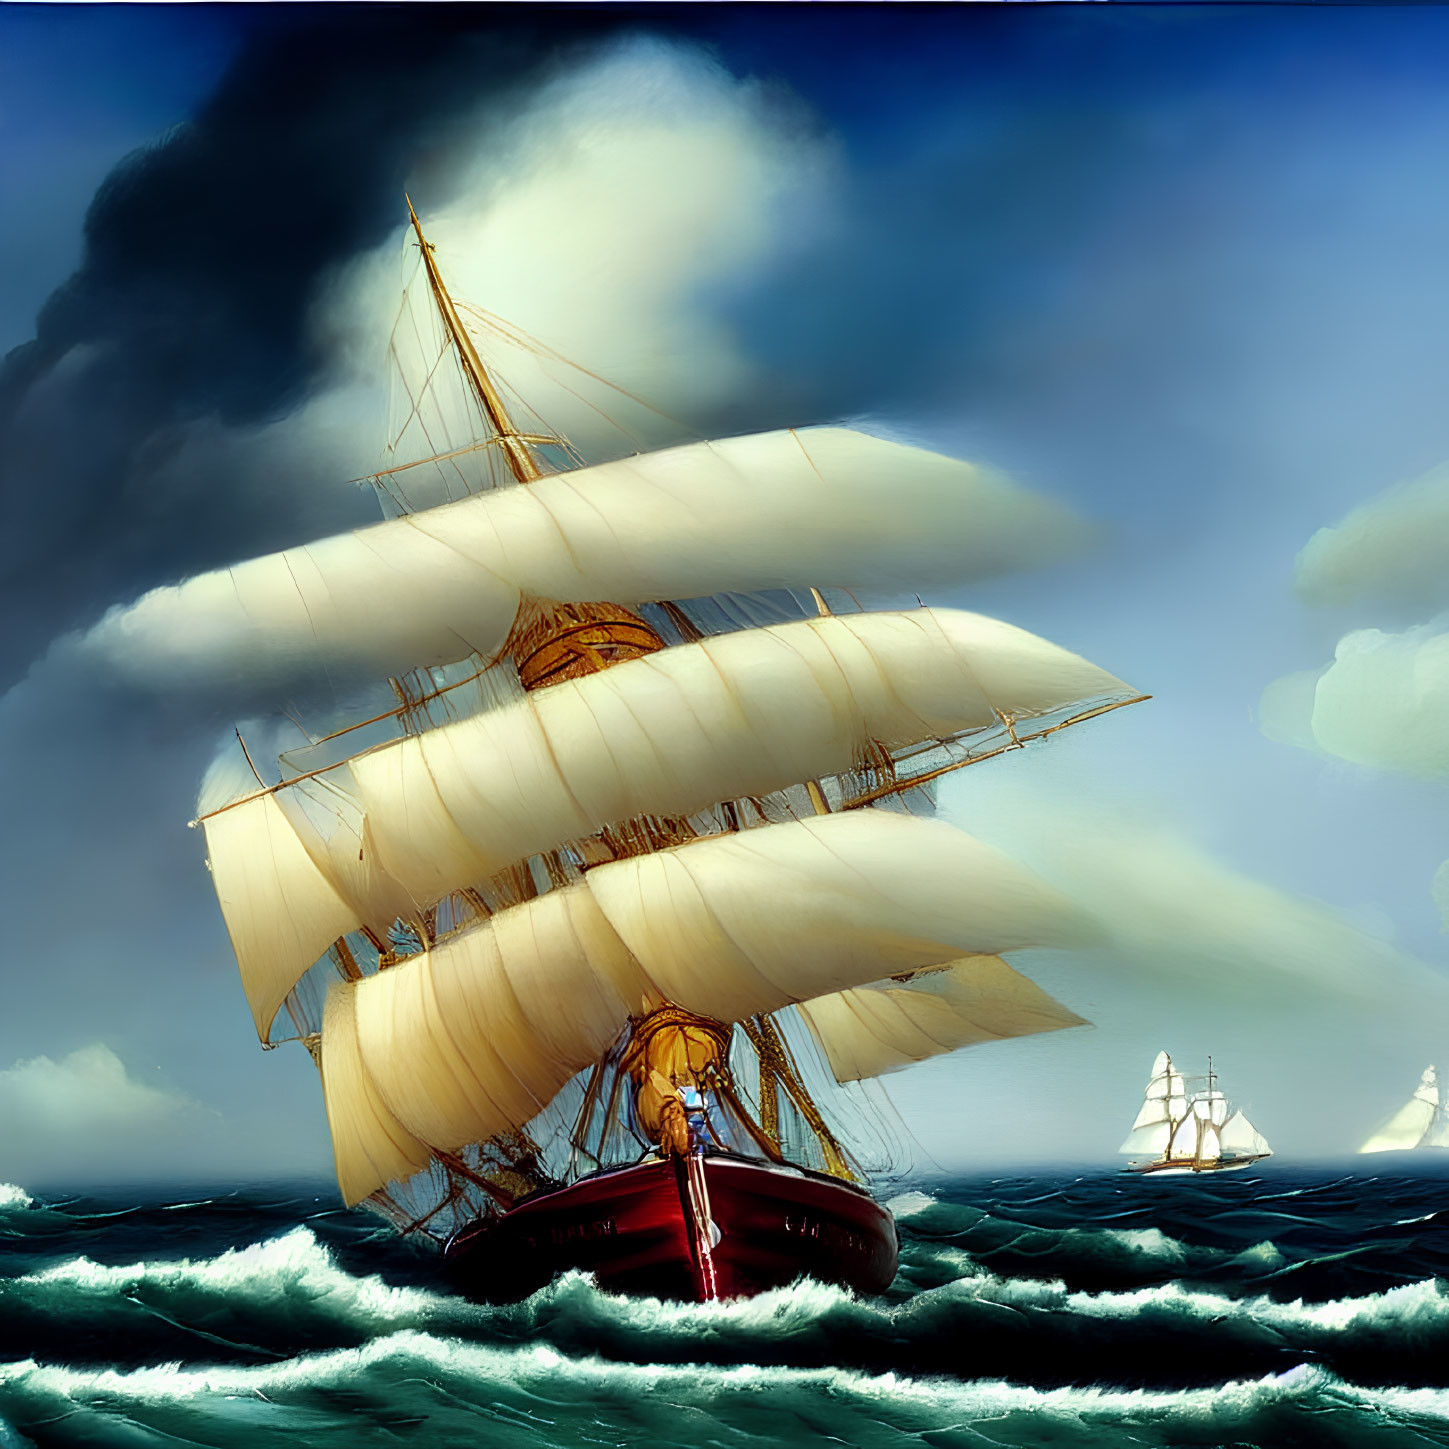 Sailing ship with white sails on turbulent seas under dramatic sky